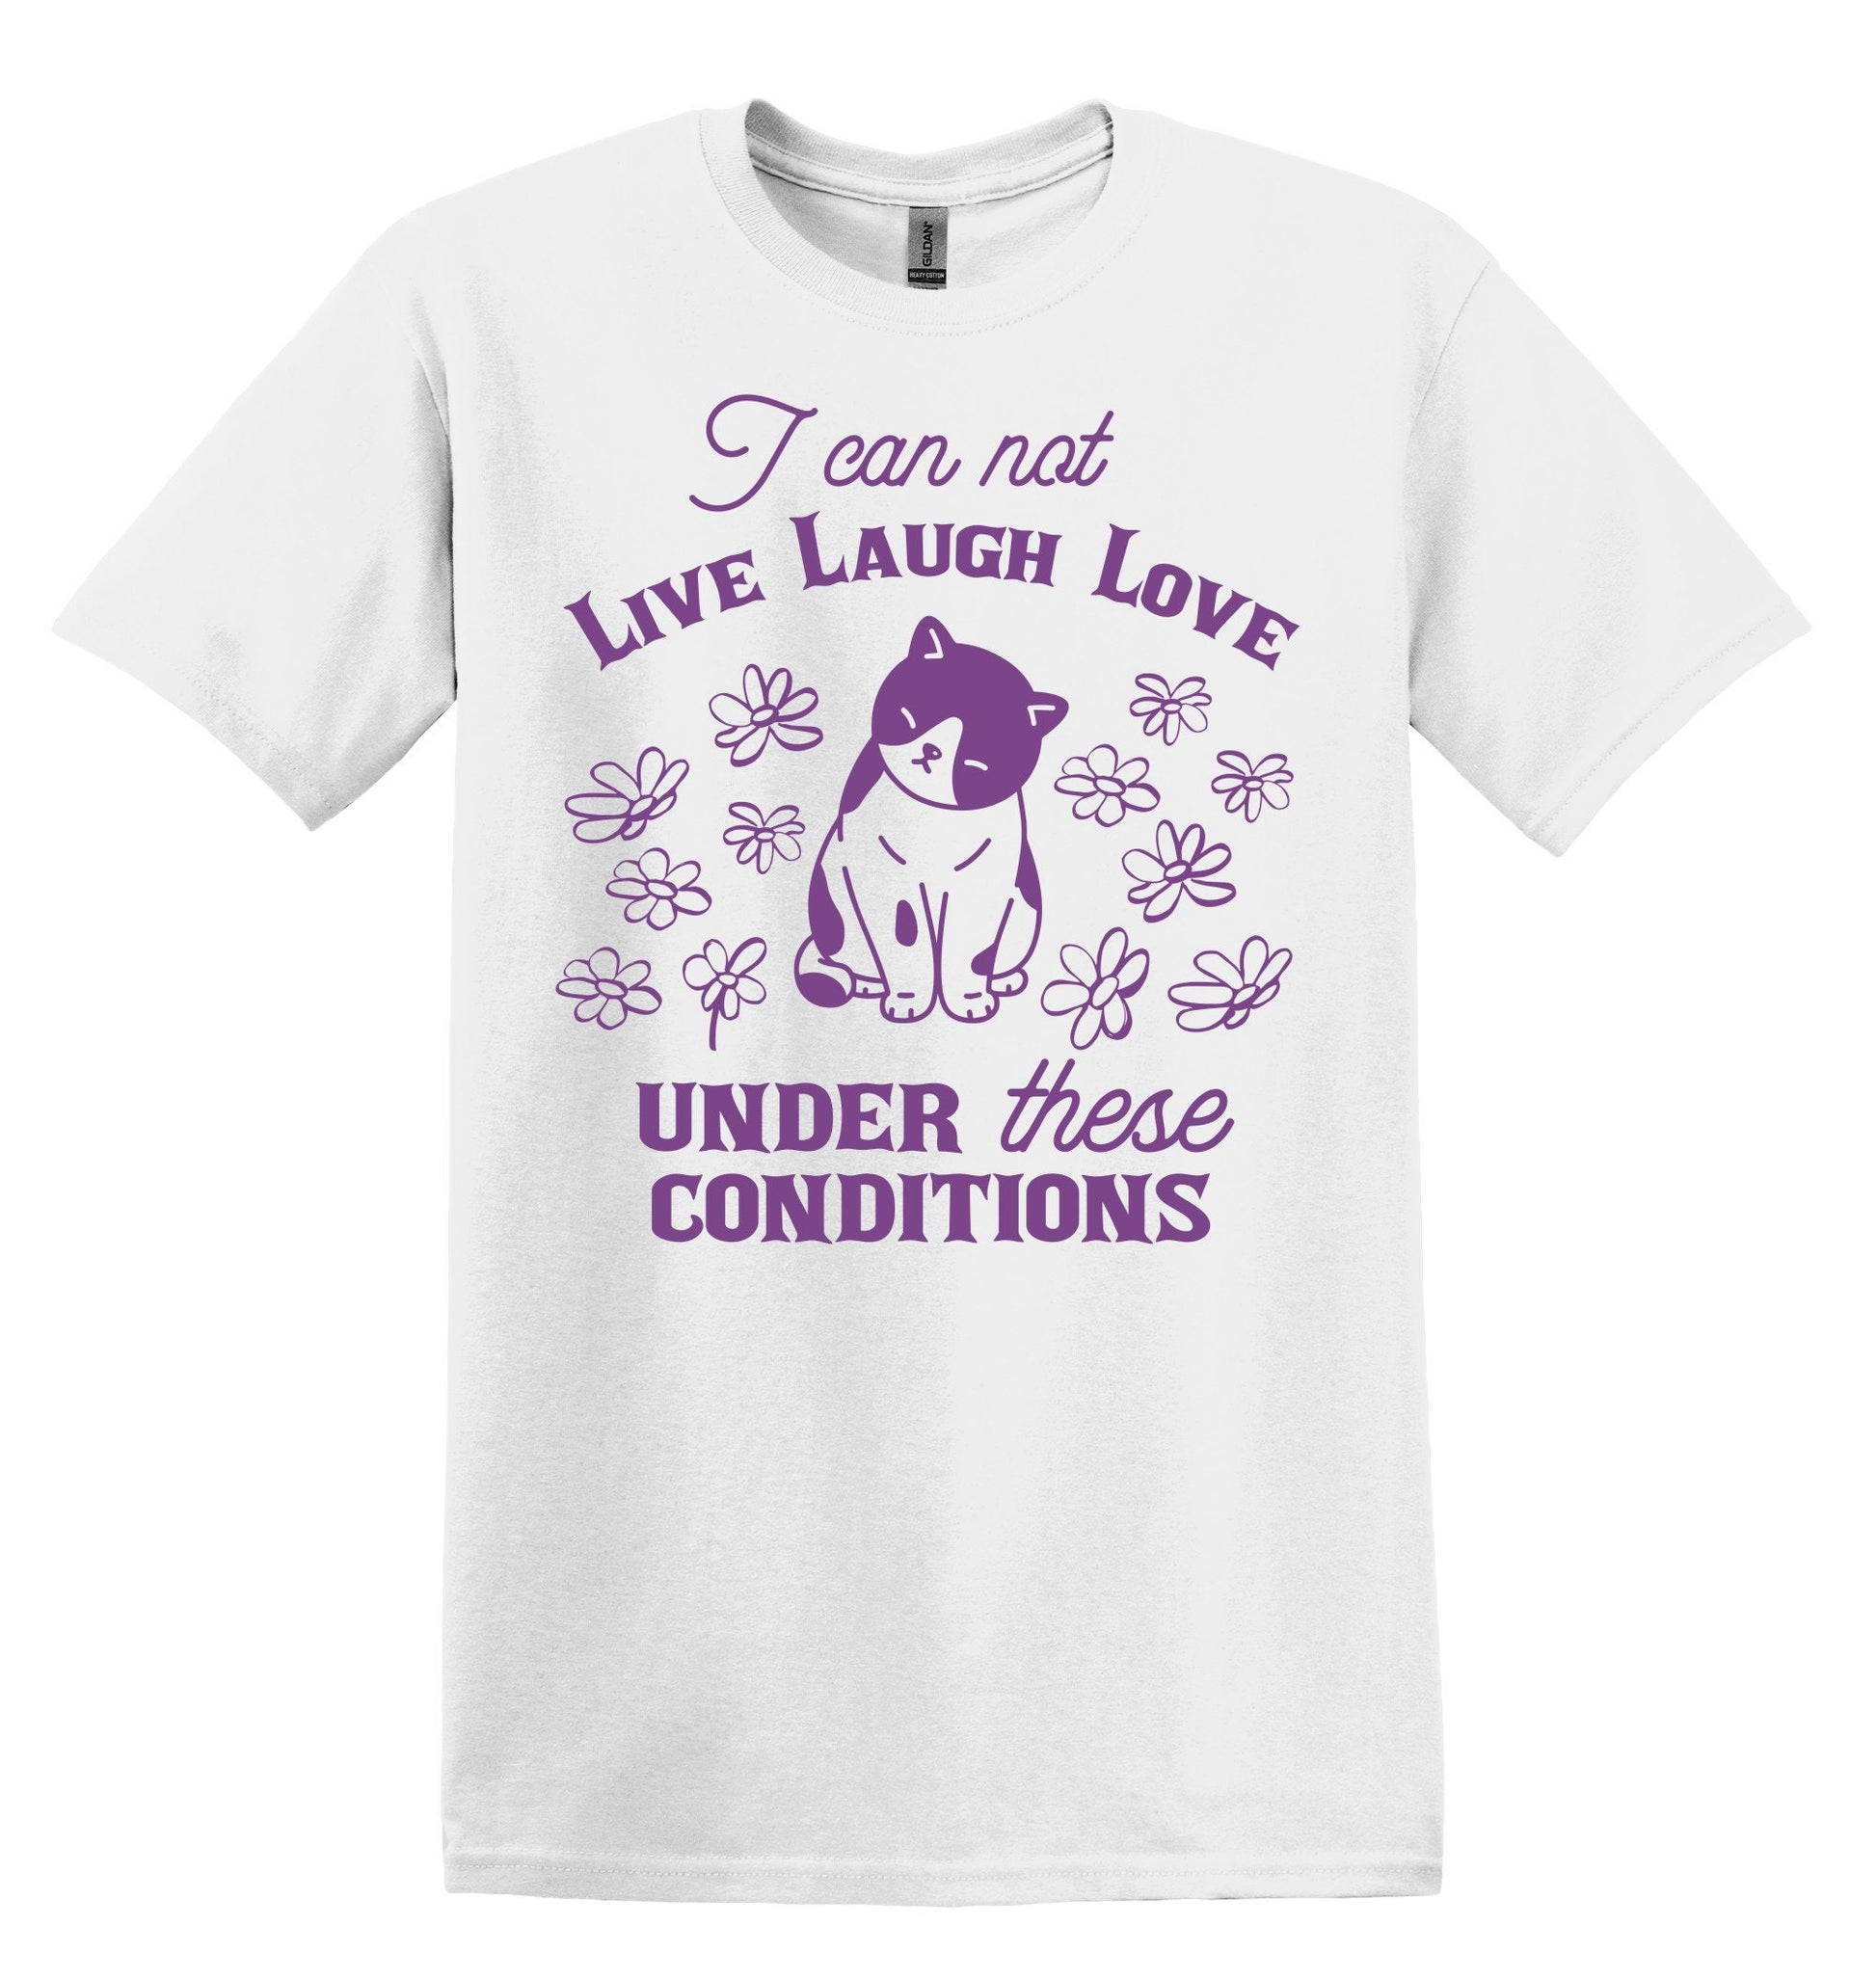 I Can Not Live Laugh Love Under These Conditions Shirt Graphic Shirt Funny Cat Shirts Vintage Funny T-Shirts Cat Shirt Minimalist Shirt